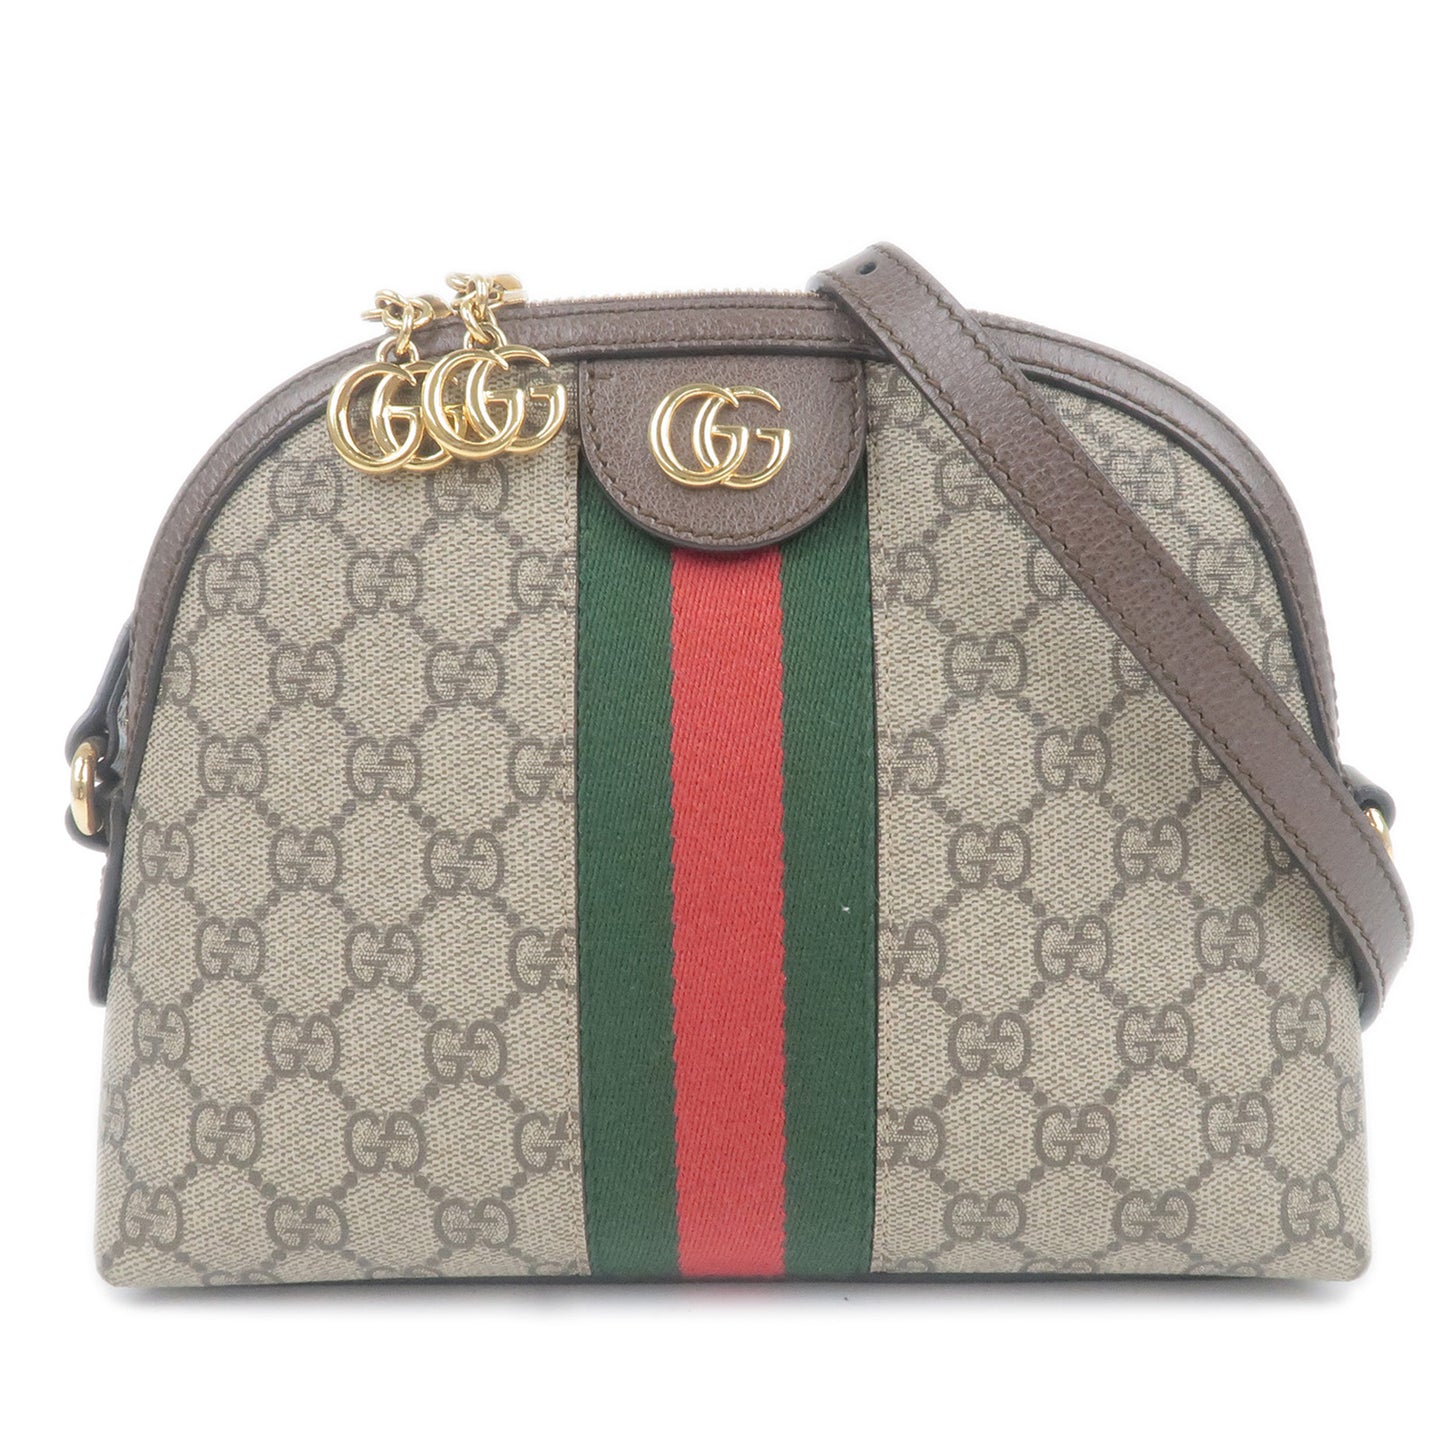 GUCCI-Sherry-Ophidia-GG-Supreme-Leather-Shoulder-Bag-499621